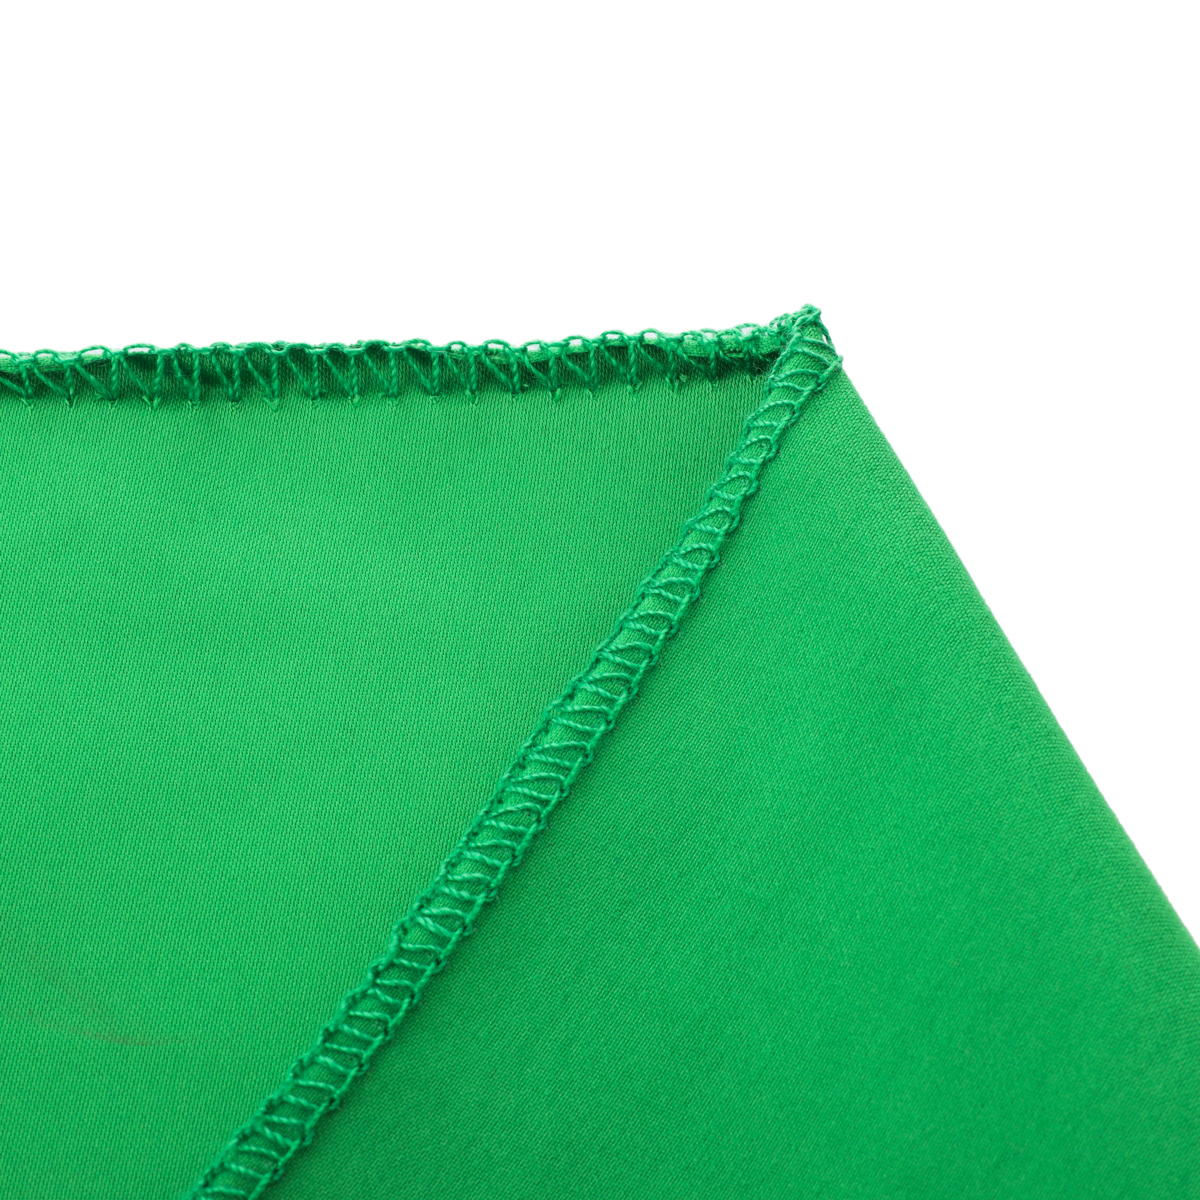 7x5FT-Green-Photography-Backdrop-Background-Studio-Photography-Prop-1632882-4